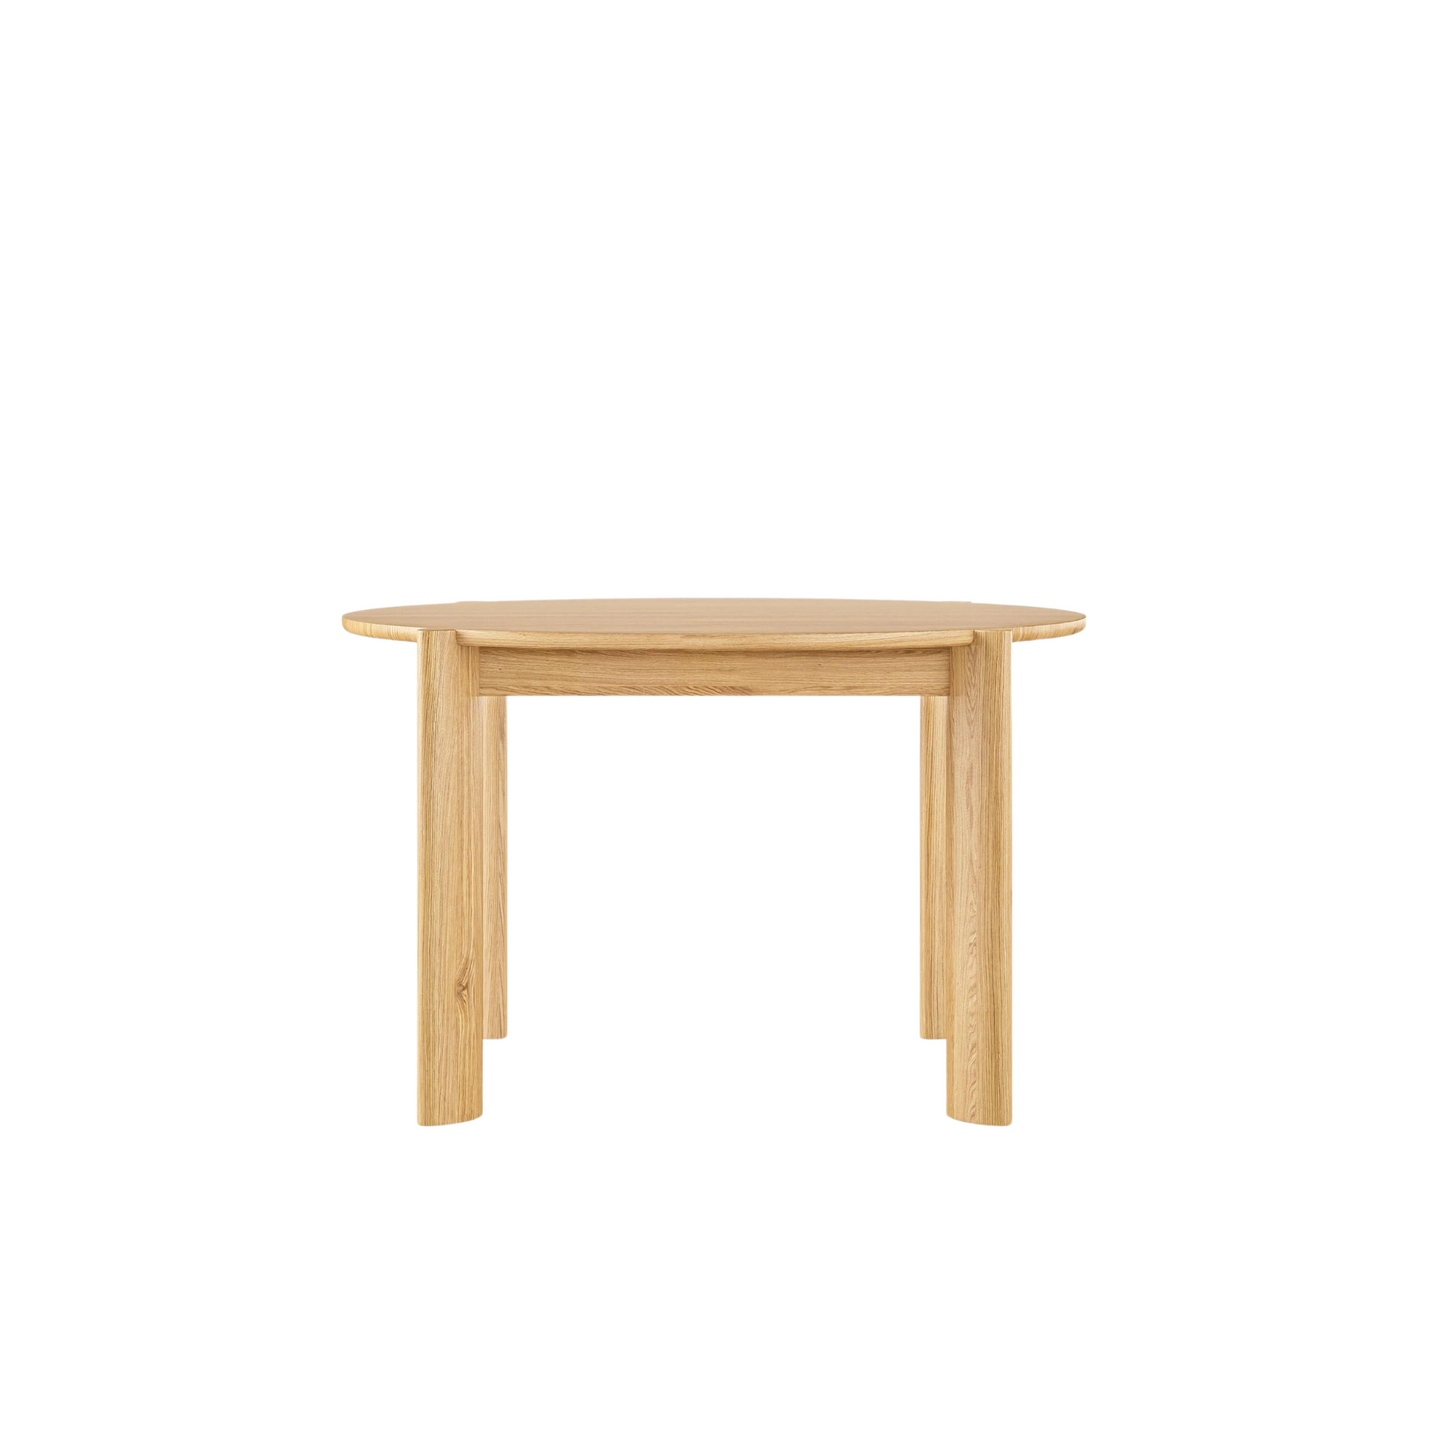 Load image into Gallery viewer, Bancroft Round Dining Table | White Oak
